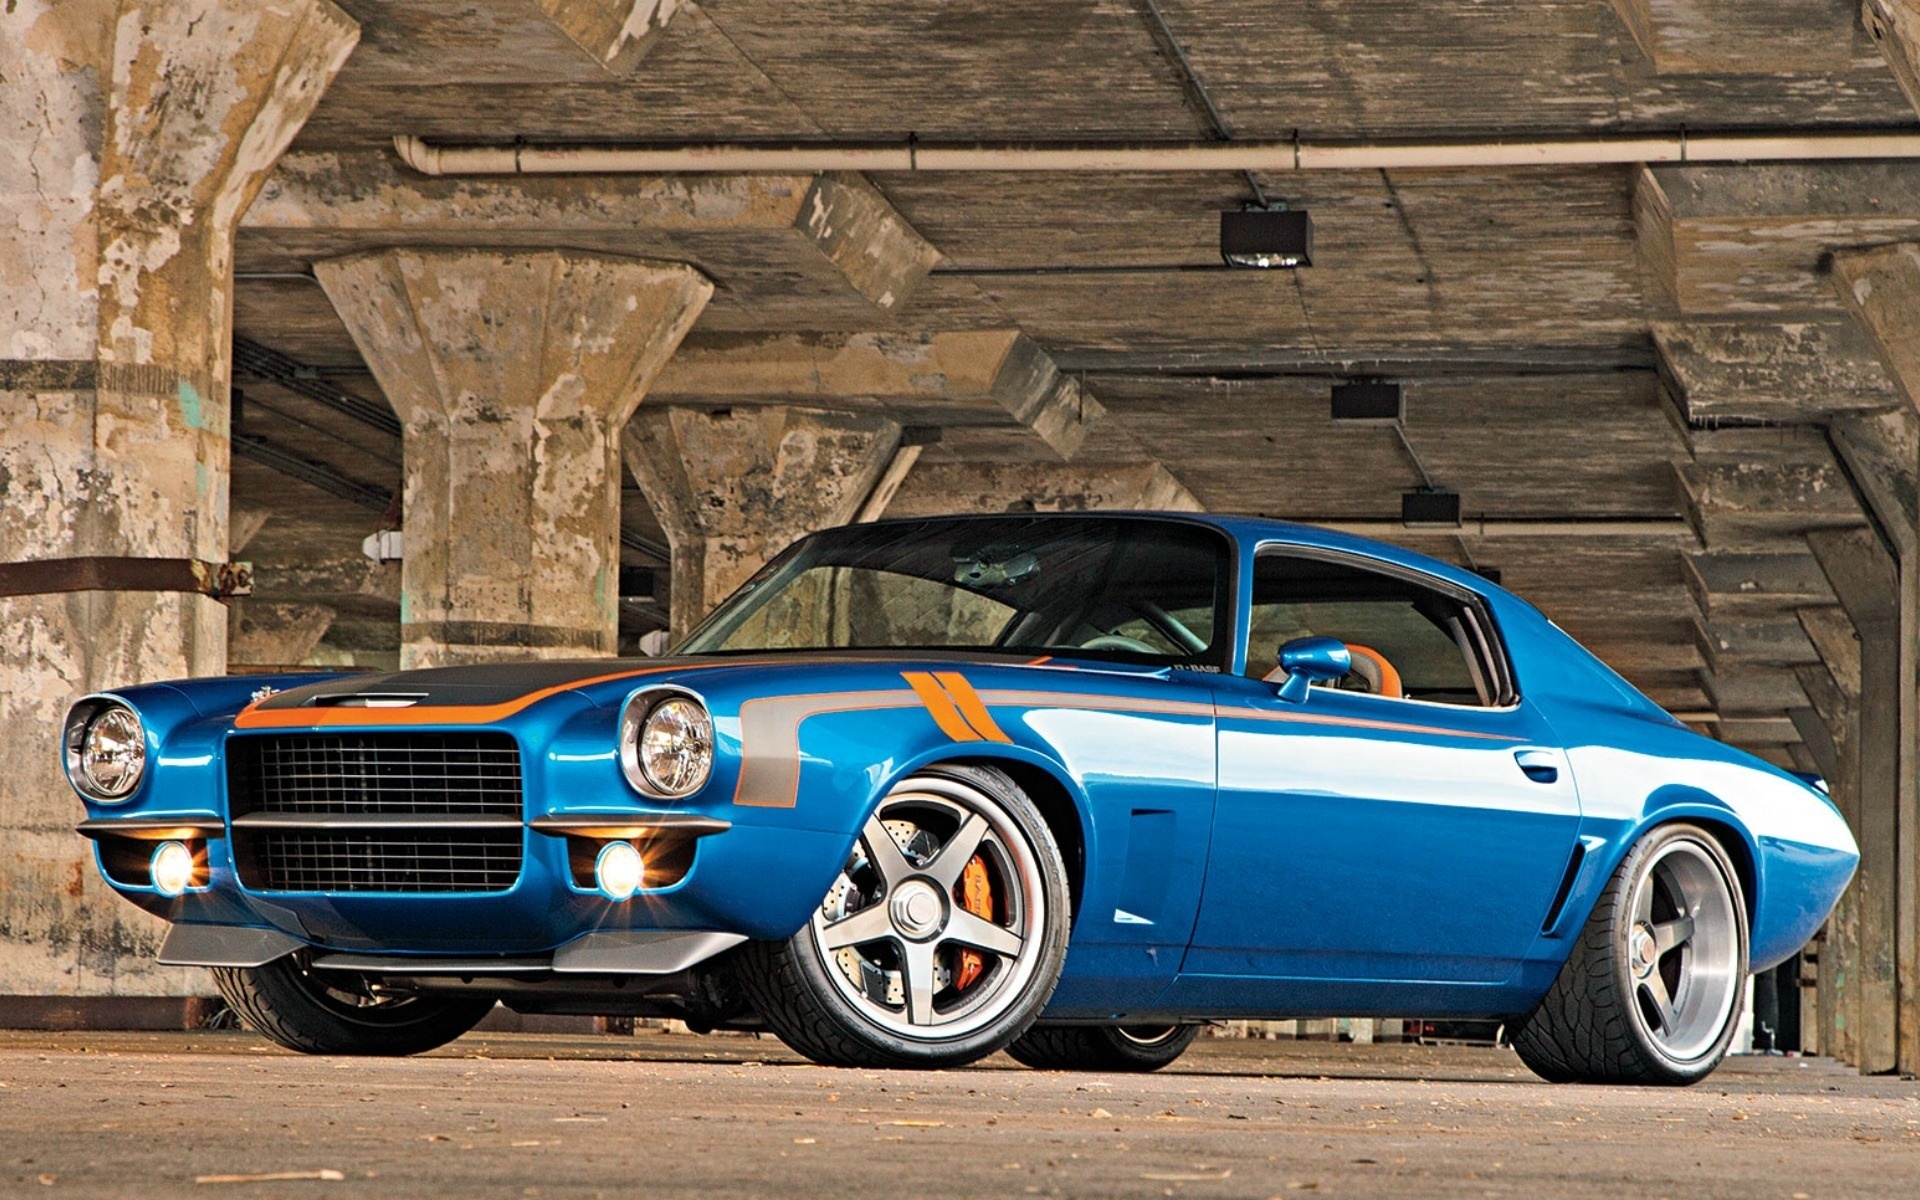 1971 tuning Chevrolet Camaro hot rod muscle cars wallpaper background 1920x1200